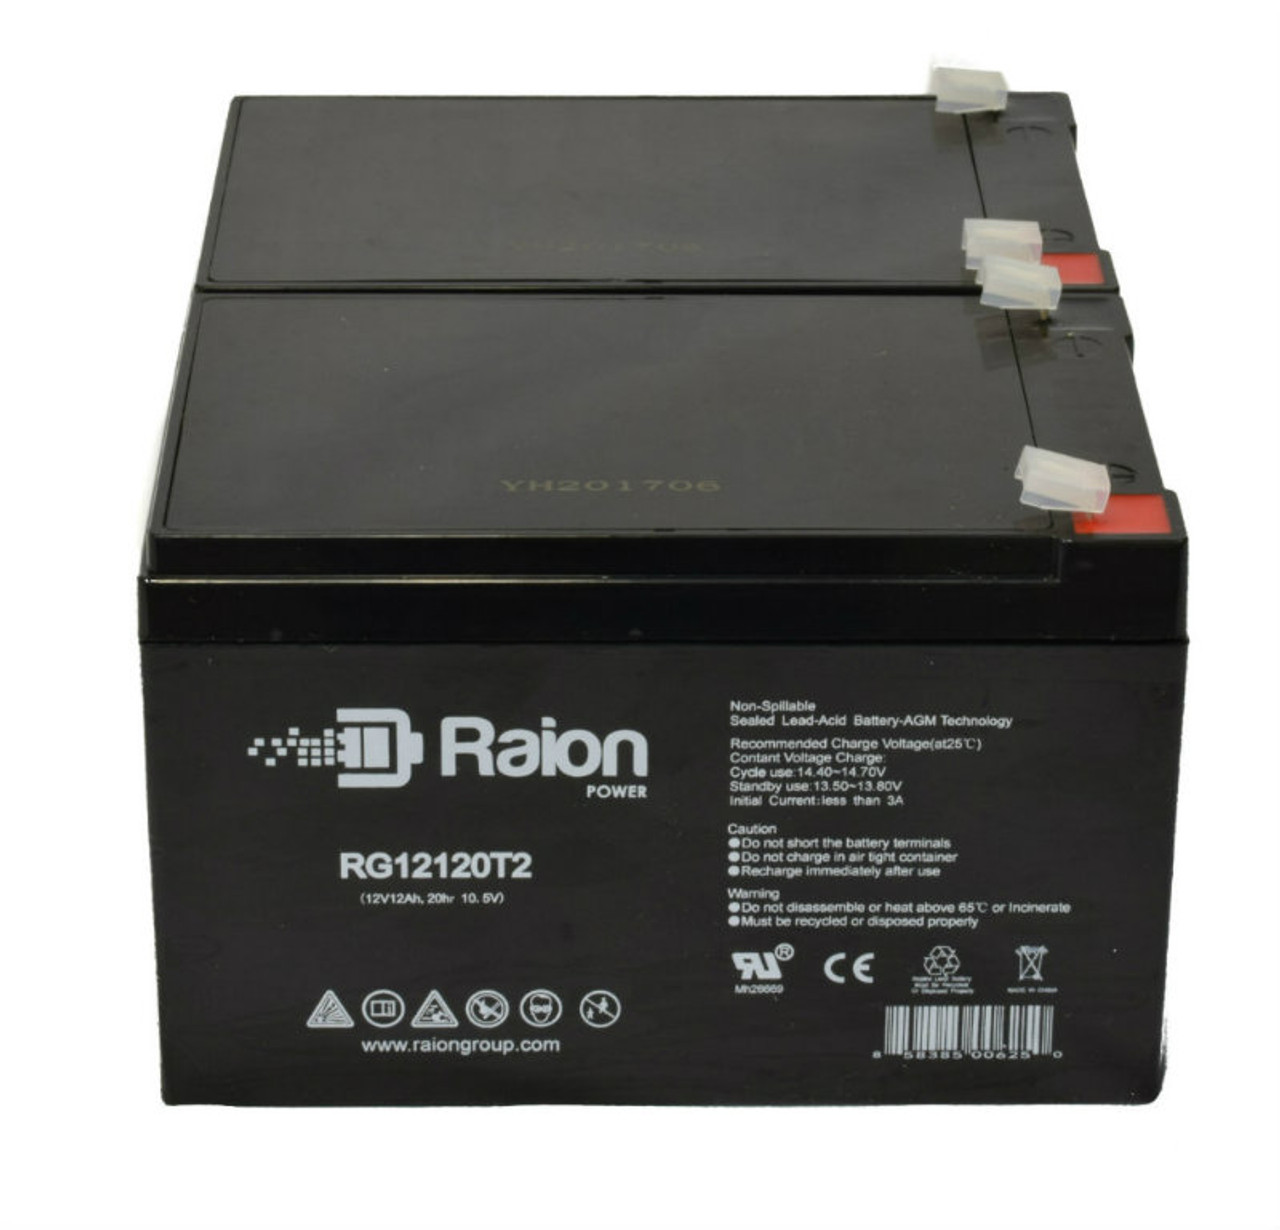 Raion Power RG12120T2 Replacement Fire Alarm Control Panel Battery for Altronix AL1042ULADA - 2 Pack